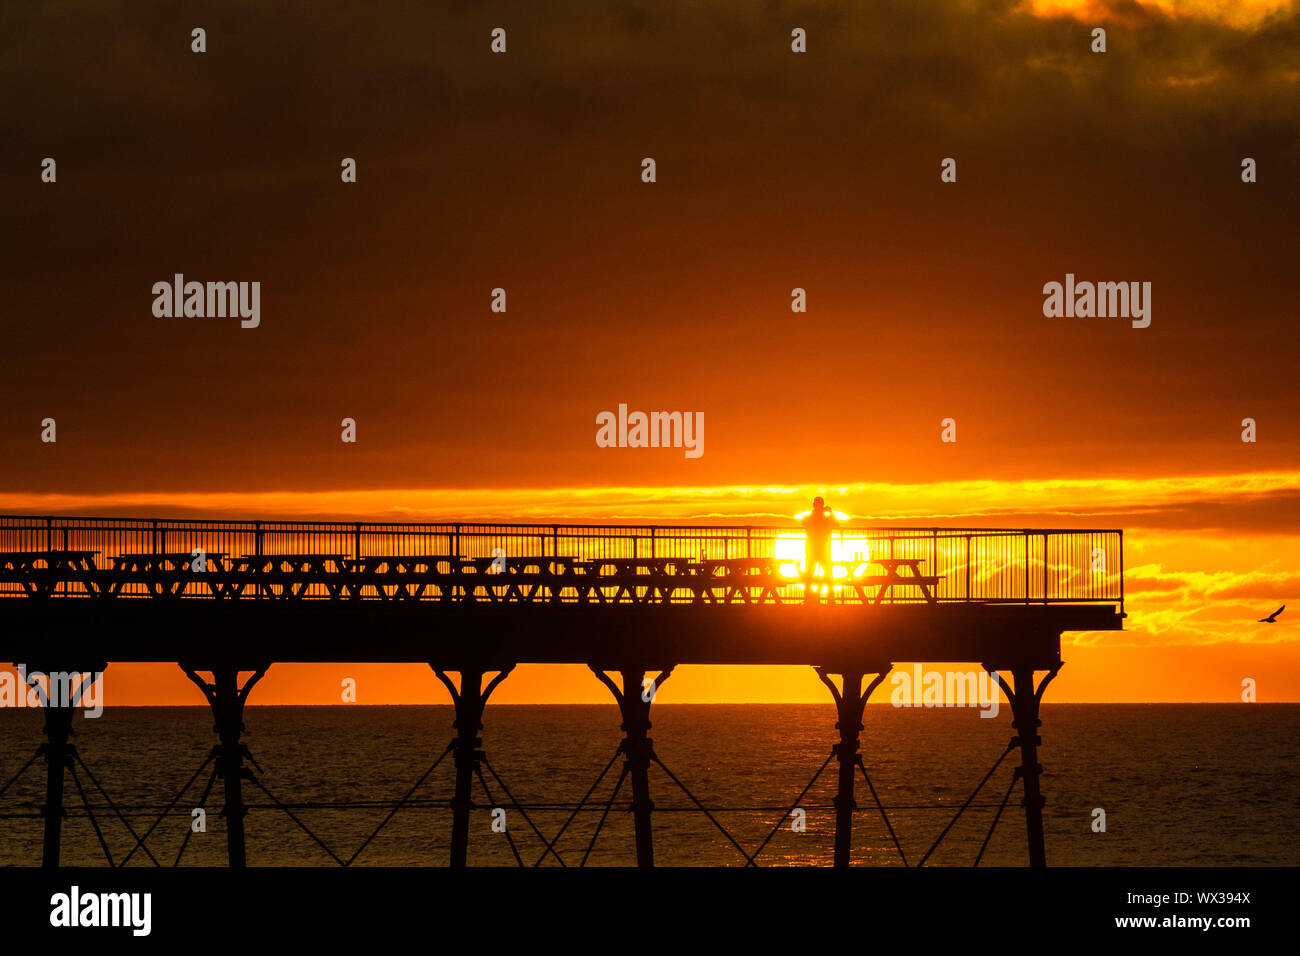 Aberystwyth, UK. 16th Sep, 2019. People standing on Aberystwyth’s Victorian seaside pier are silhouetted as they watch the last rays of the suns as it sets over Cardigan Bay, on a glorious mid autumn evening, The week ahead is expected to be warm and settled with a high pressure system dominating the weather in the southern parts of the UK. Credit: keith morris/Alamy Live News Stock Photo